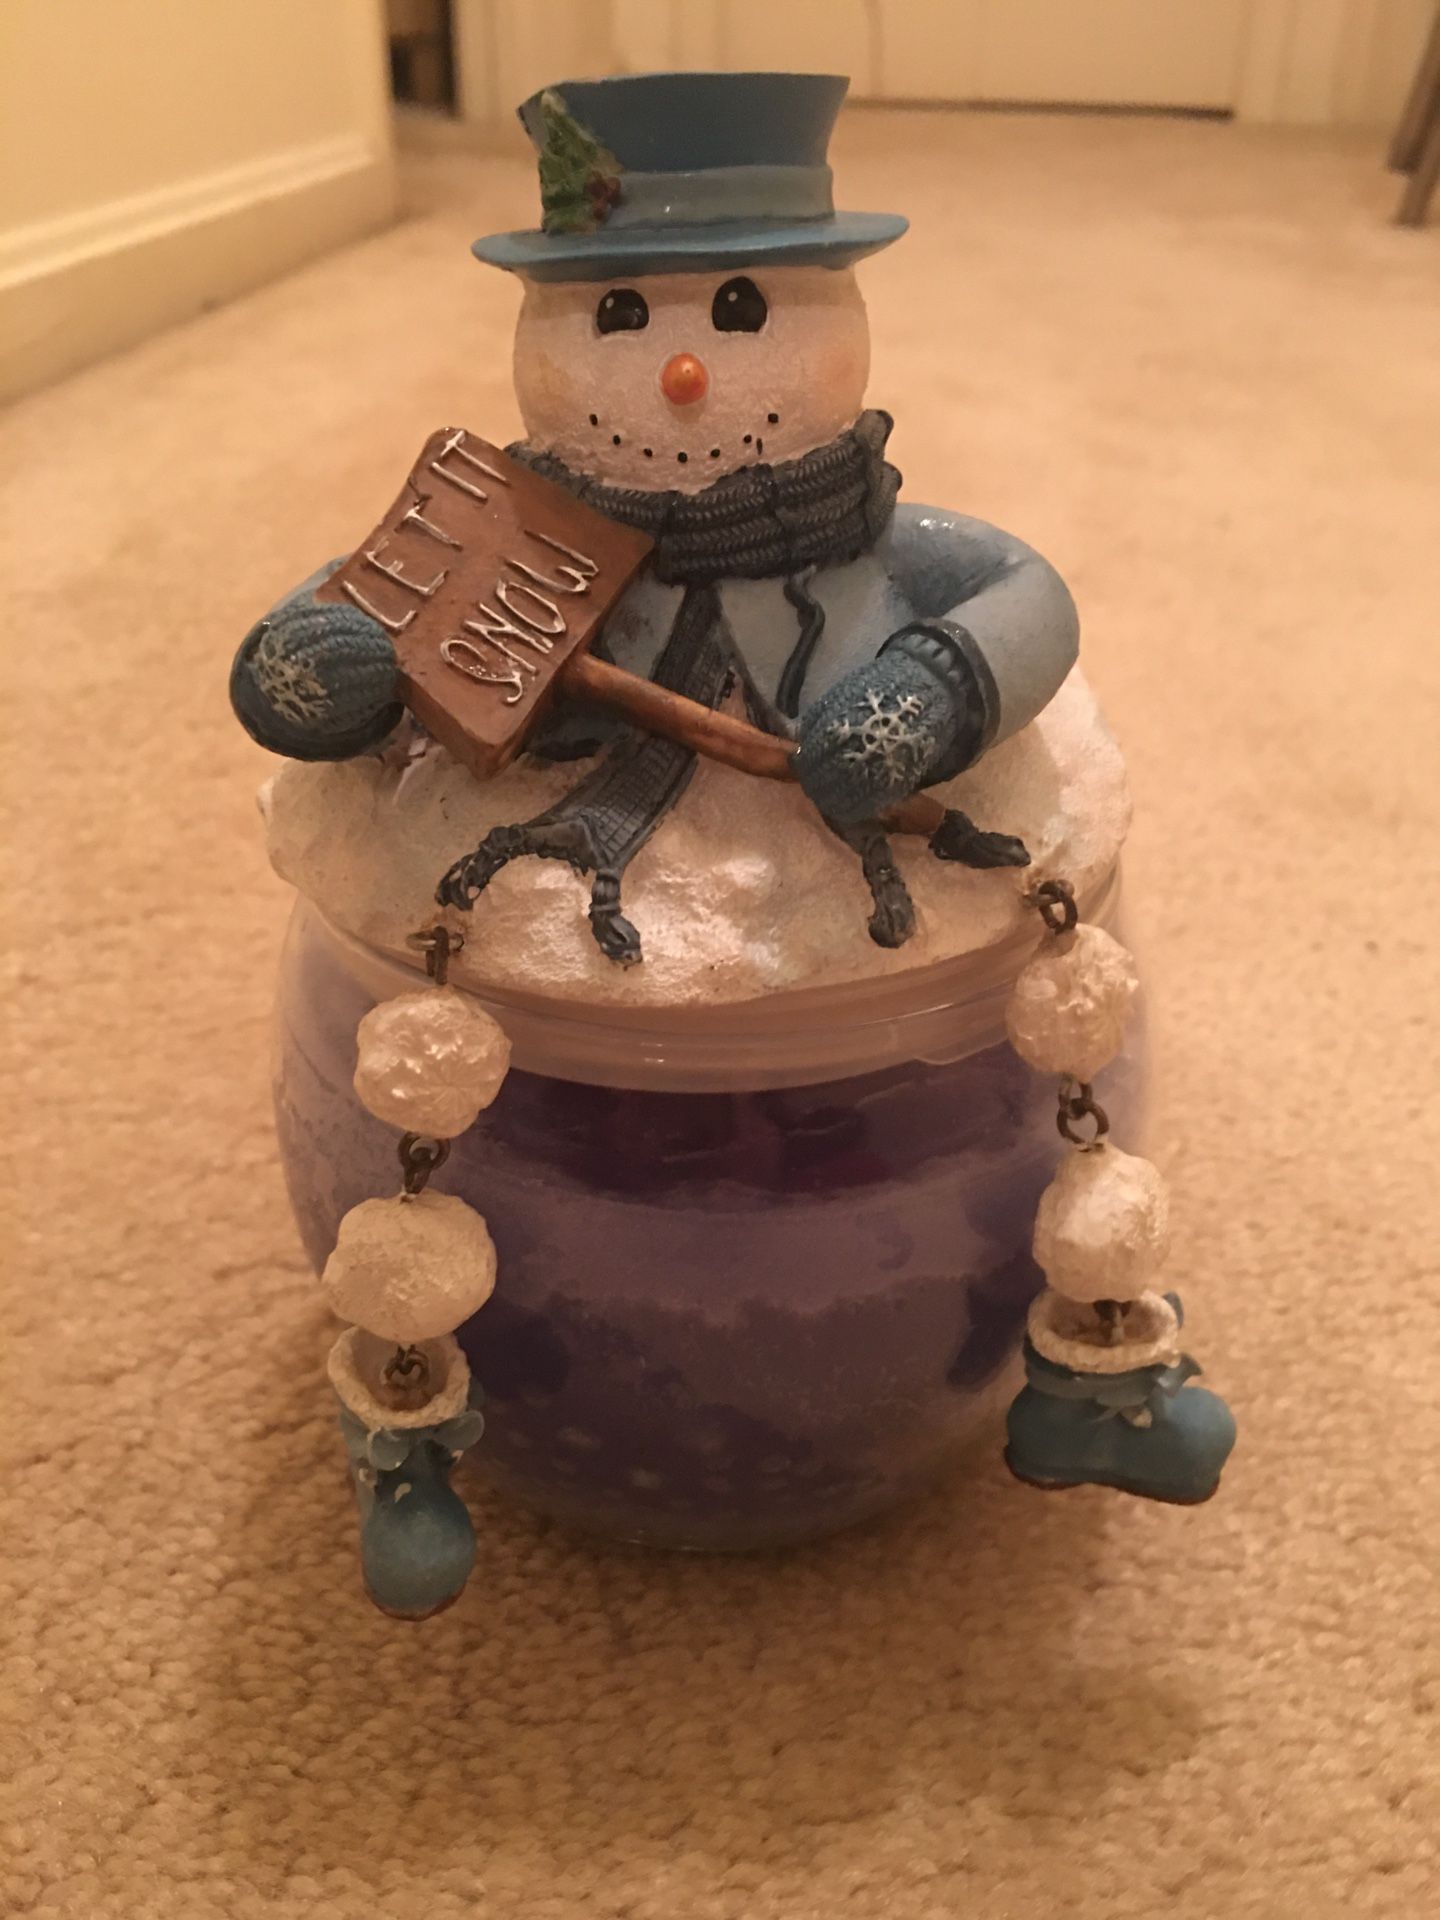 Candle with snowman lid/topper